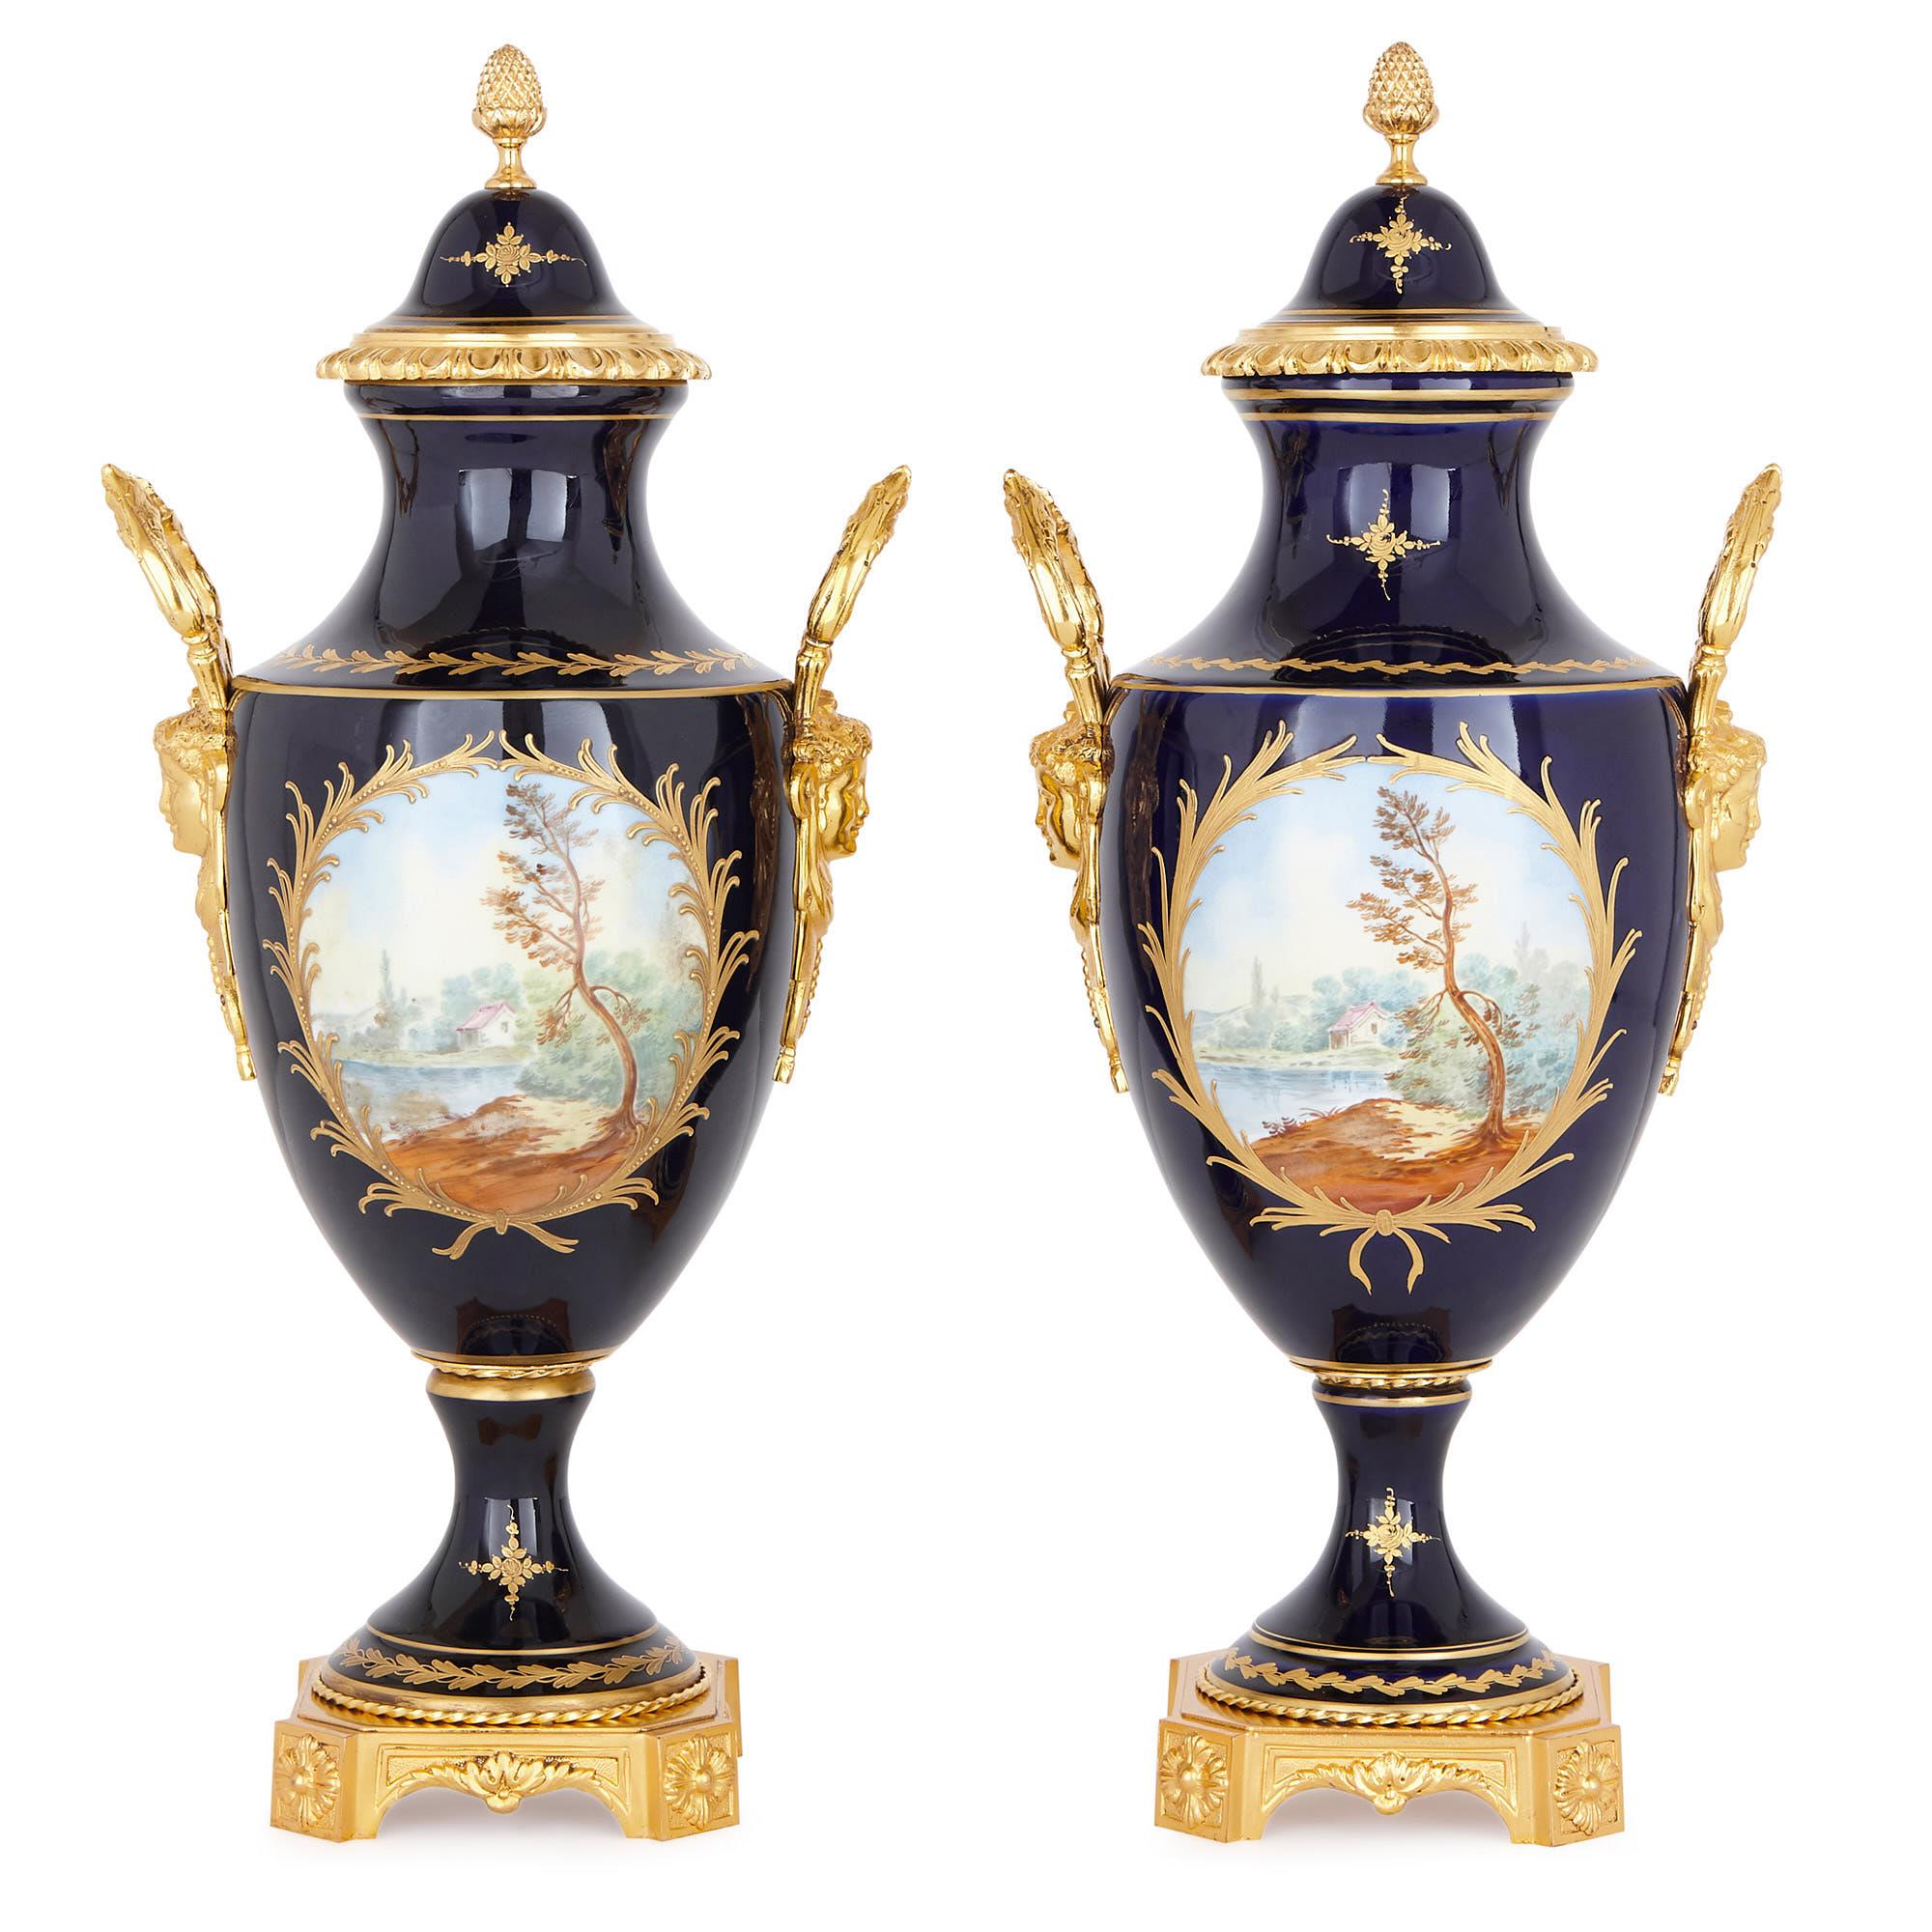 These Sèvres style vases are elegant works of decorative art, which have been finely painted, gilded and mounted in gilt bronze (ormolu). The vases are designed in a graceful Rococo style, which was characteristic of porcelain goods produced by the